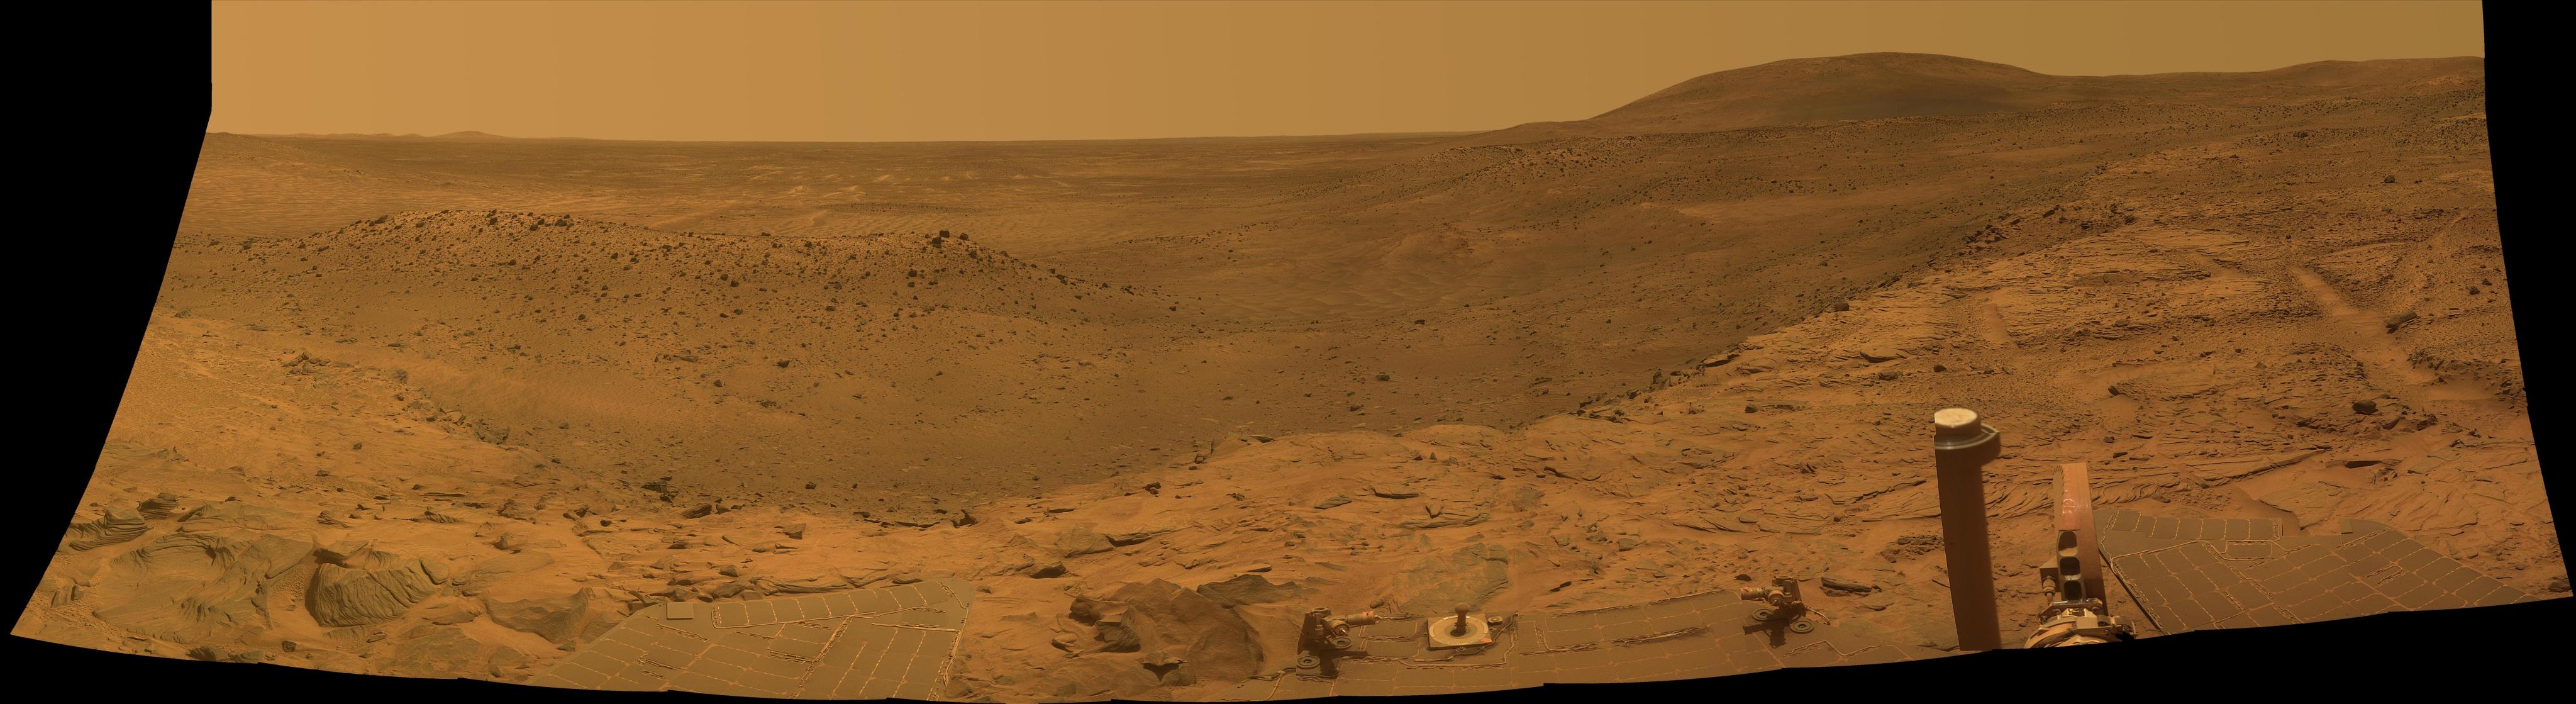 NASA'S Mars Exploration Rover Spirit captured this westward view from atop a low plateau where Sprit spent the closing months of 2007.